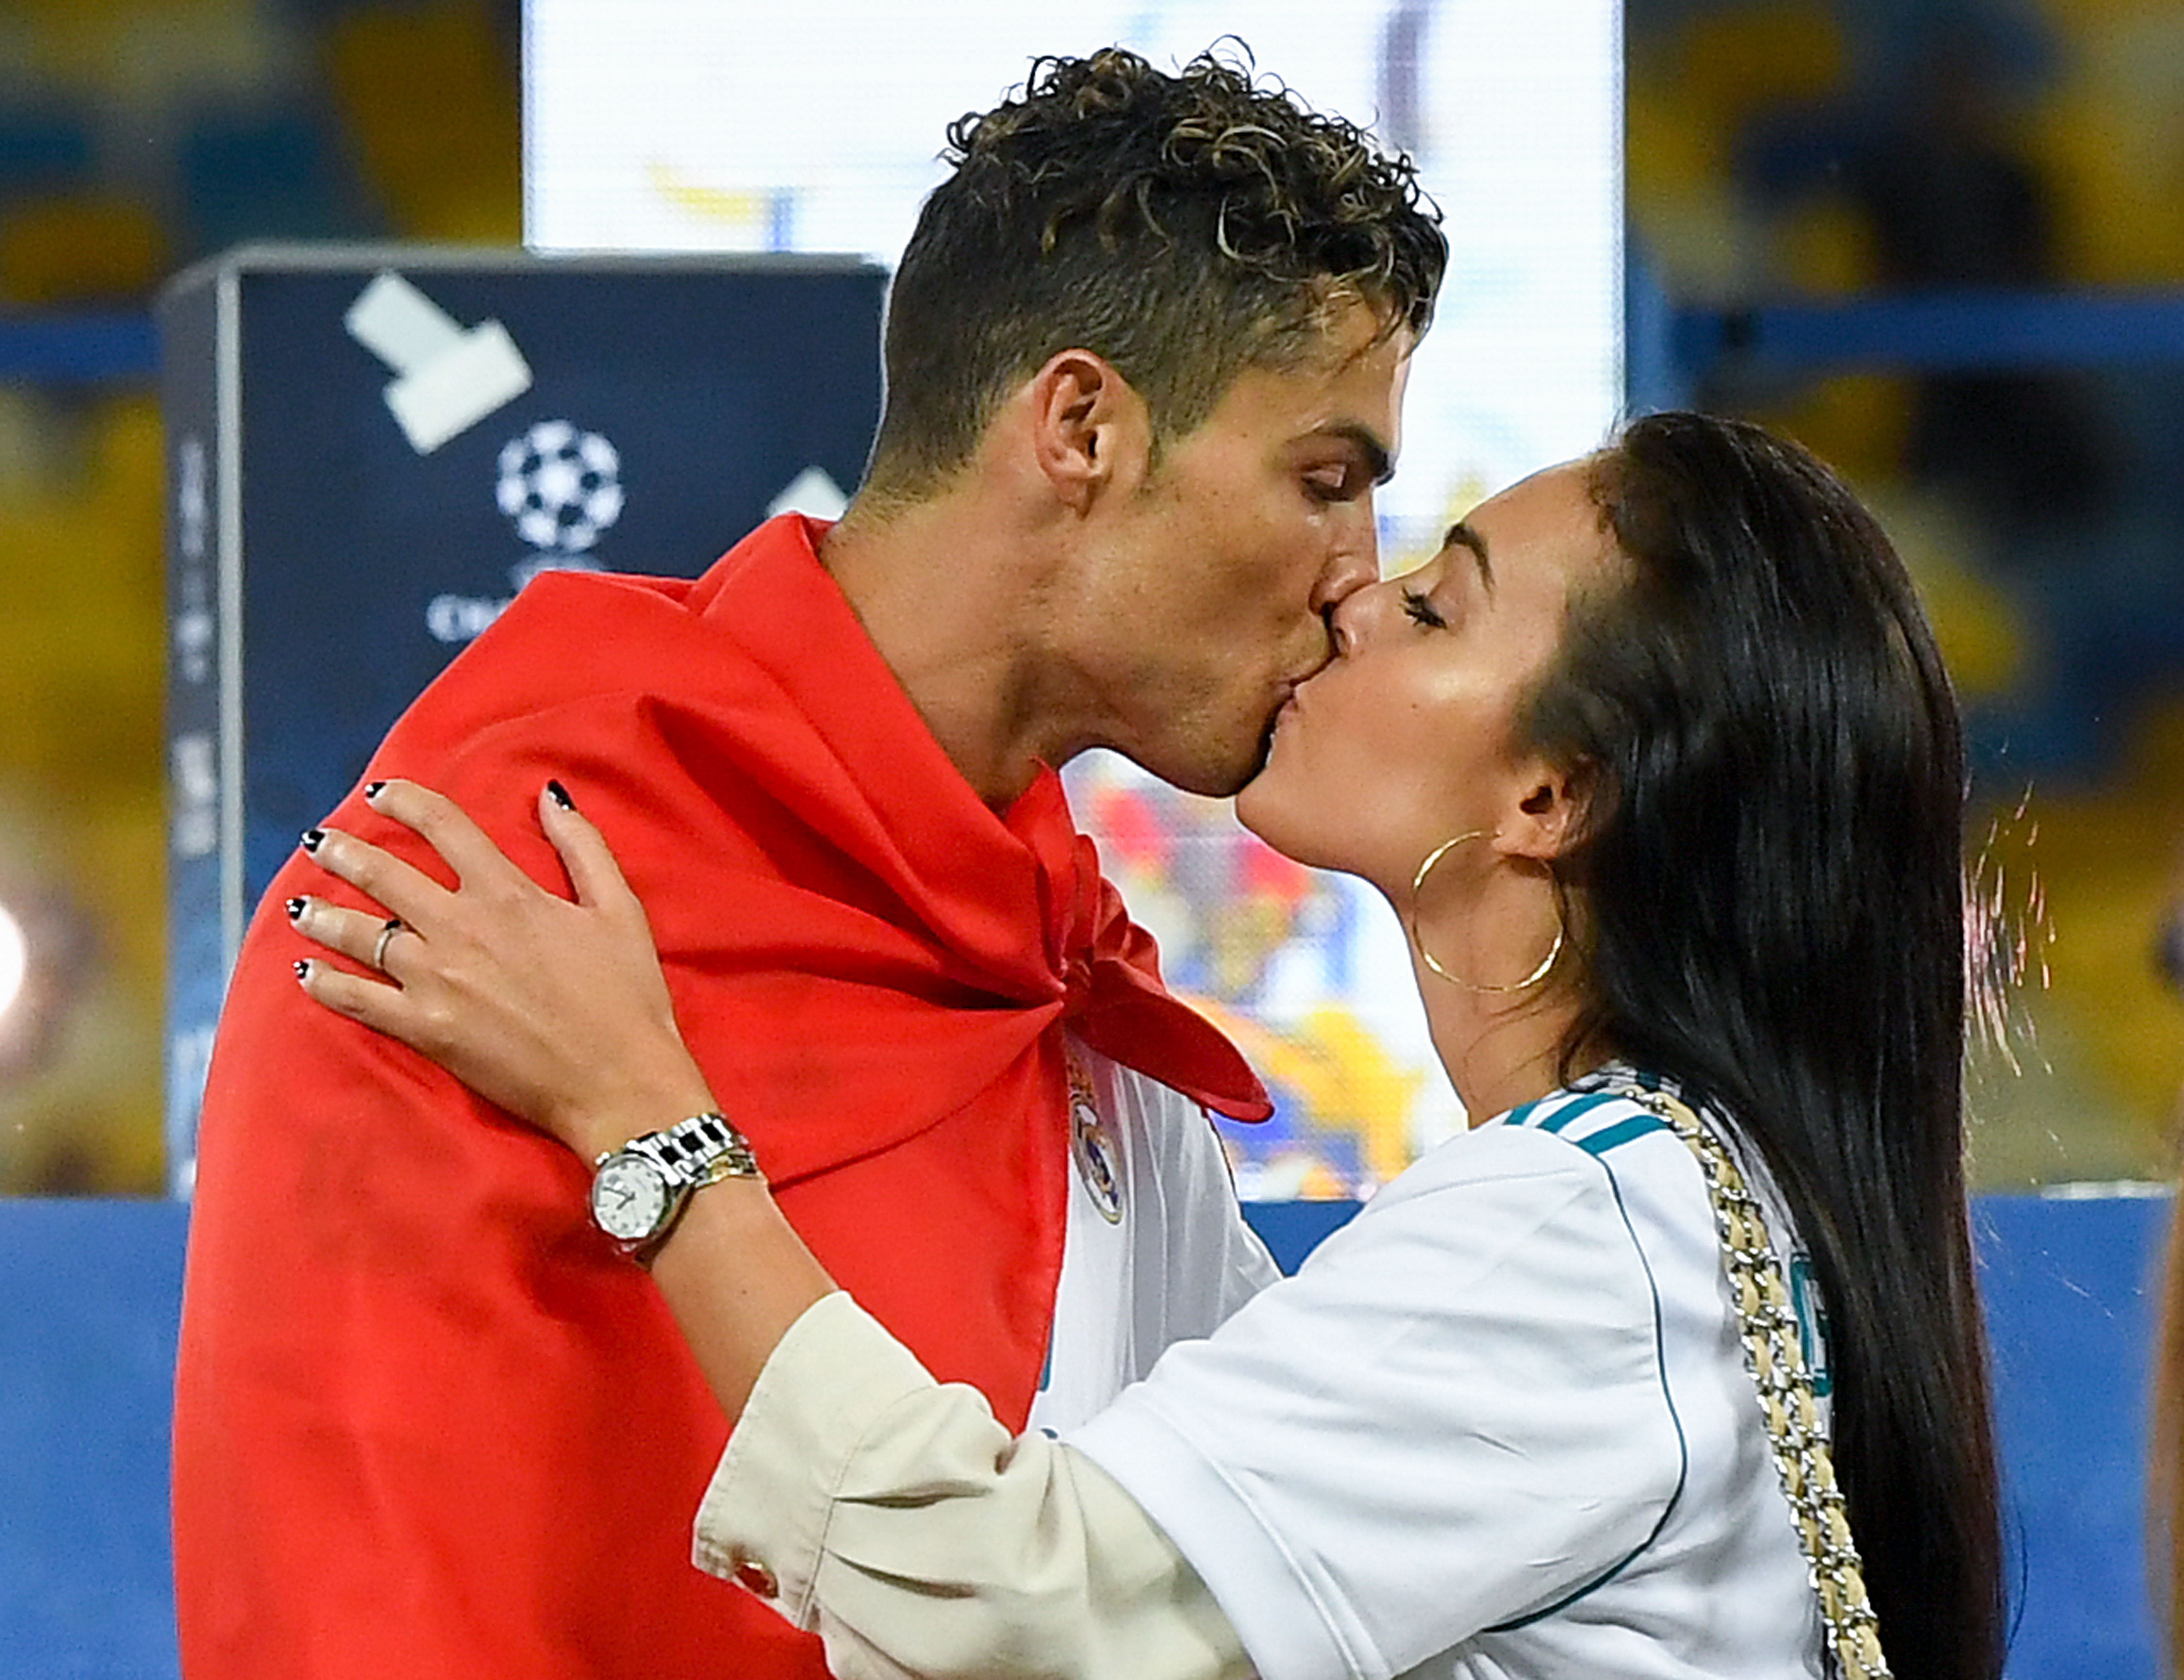 KIEV, UKRAINE - MAY 26: Cristiano Ronaldo of Real Madrid CF kisses hsi girlfriend Georgina Rodriguez as they celebrate his side victory following winning the UEFA Champions League final between Real Madrid and Liverpool on May 26, 2018 in Kiev, Ukraine. (Photo by David Ramos/Getty Images)